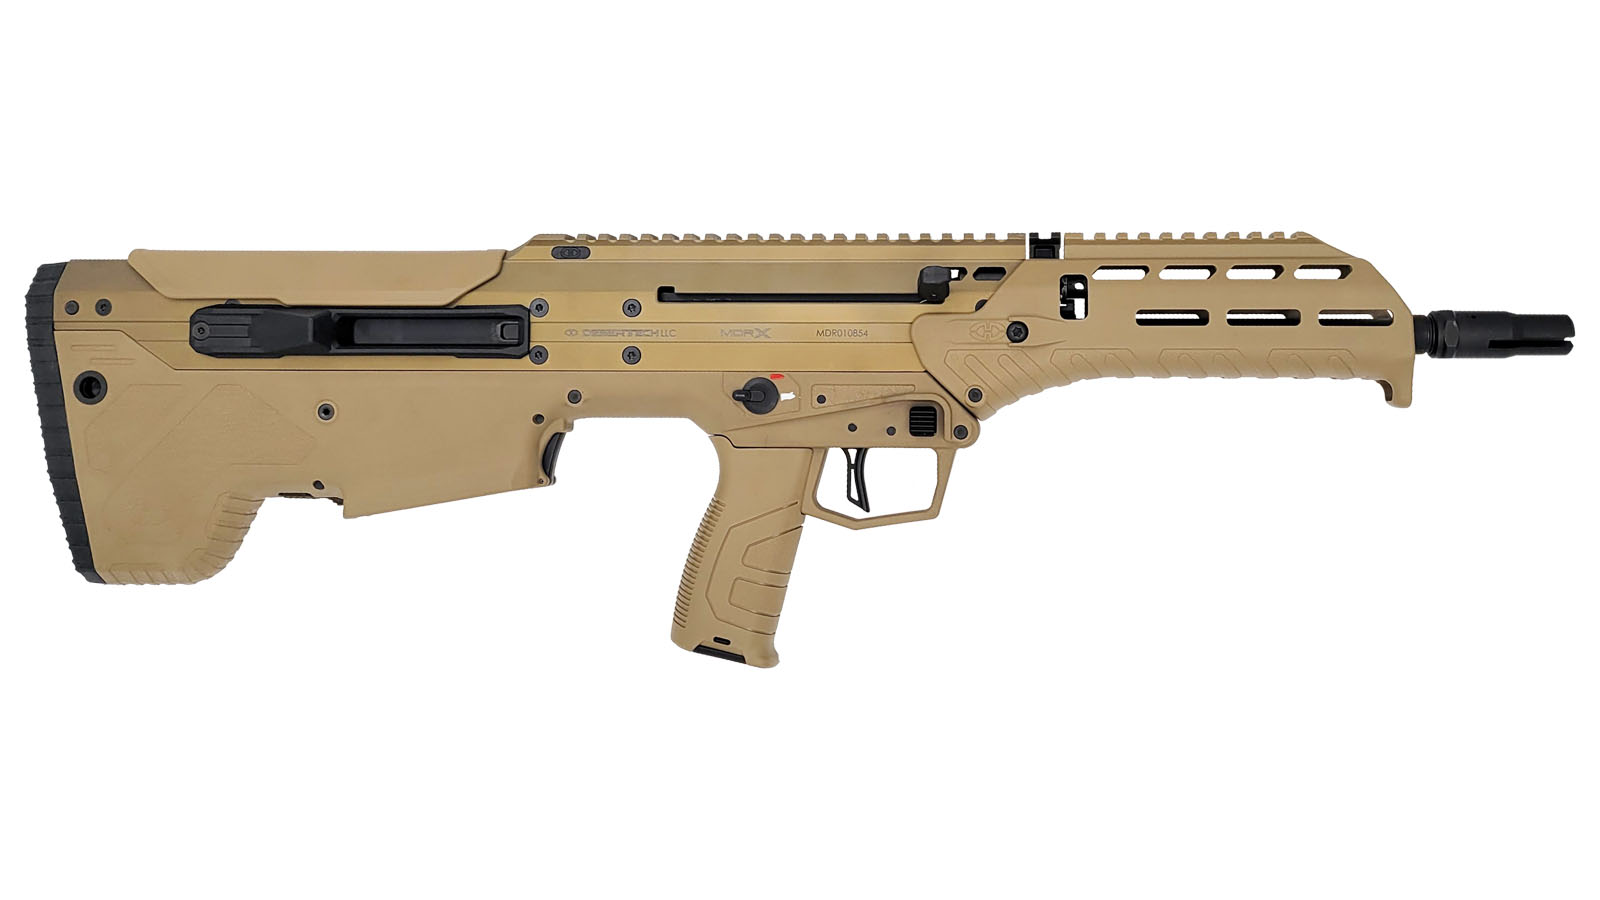 MDRx Rifle, 556NATO 223Rem 16" 30rd Side-Ejection FDE